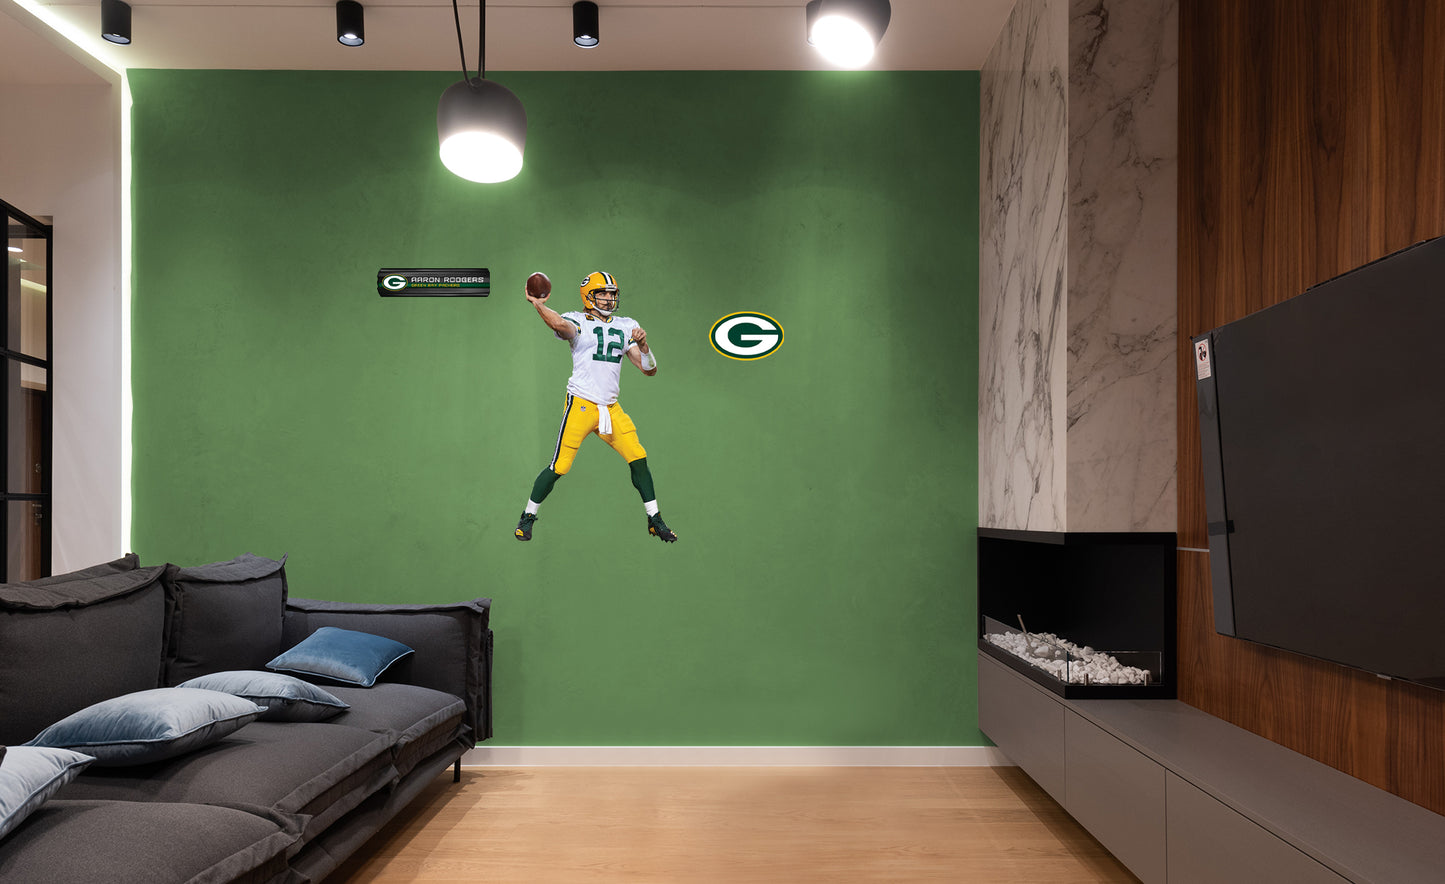 Green Bay Packers: Aaron Rodgers Away - Officially Licensed NFL Removable Adhesive Decal